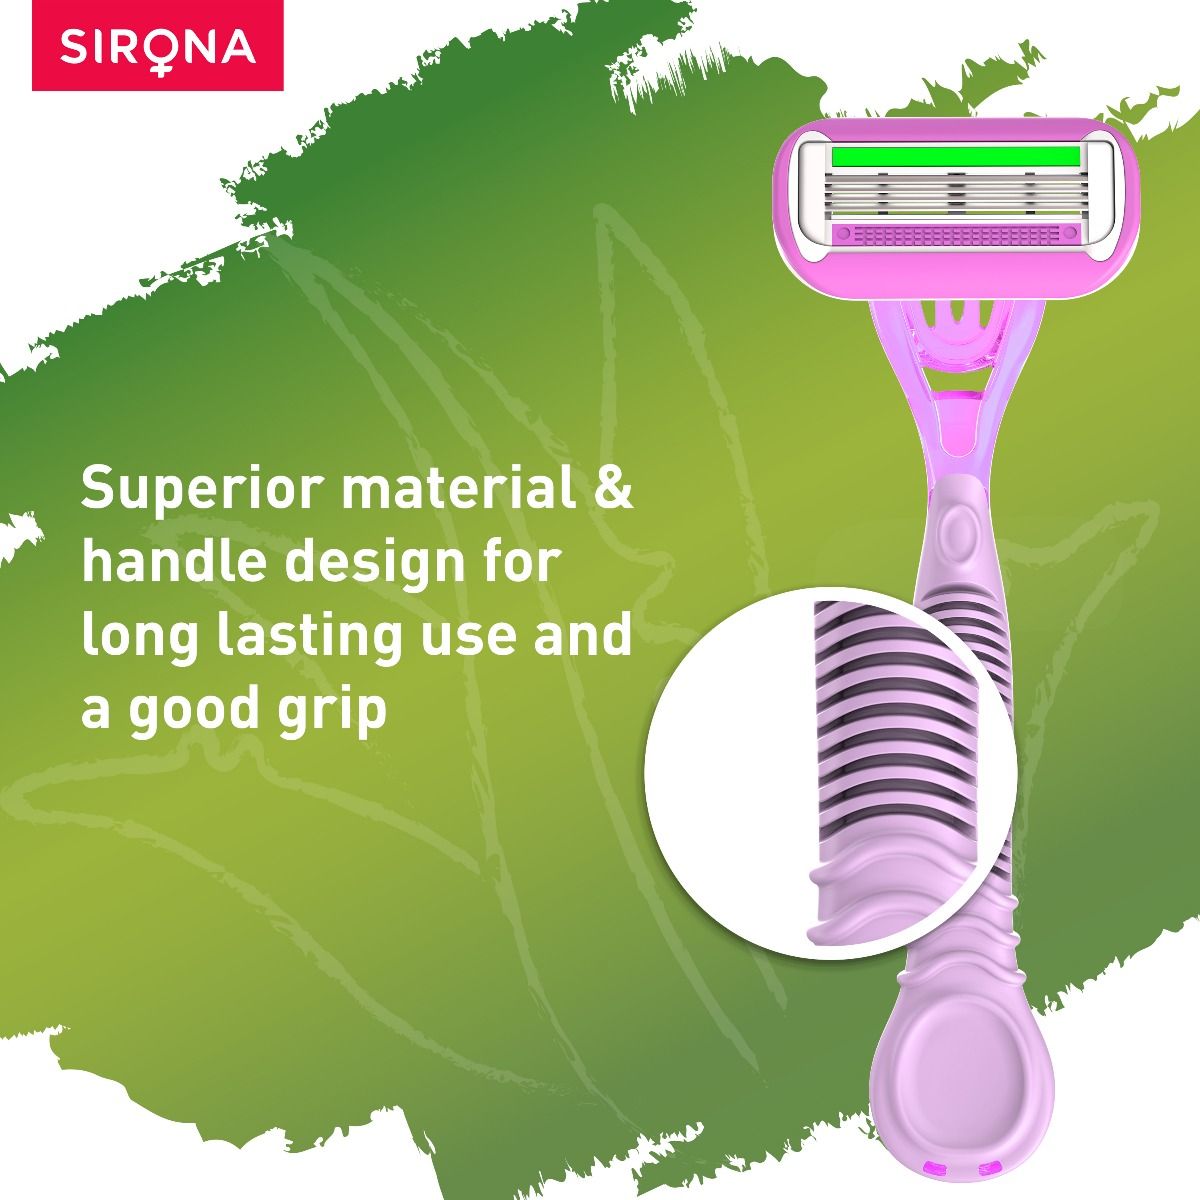 Sirona Aloe-Boost Reusable 4 Blade Razor For Women, 1 Count, Pack of 1 